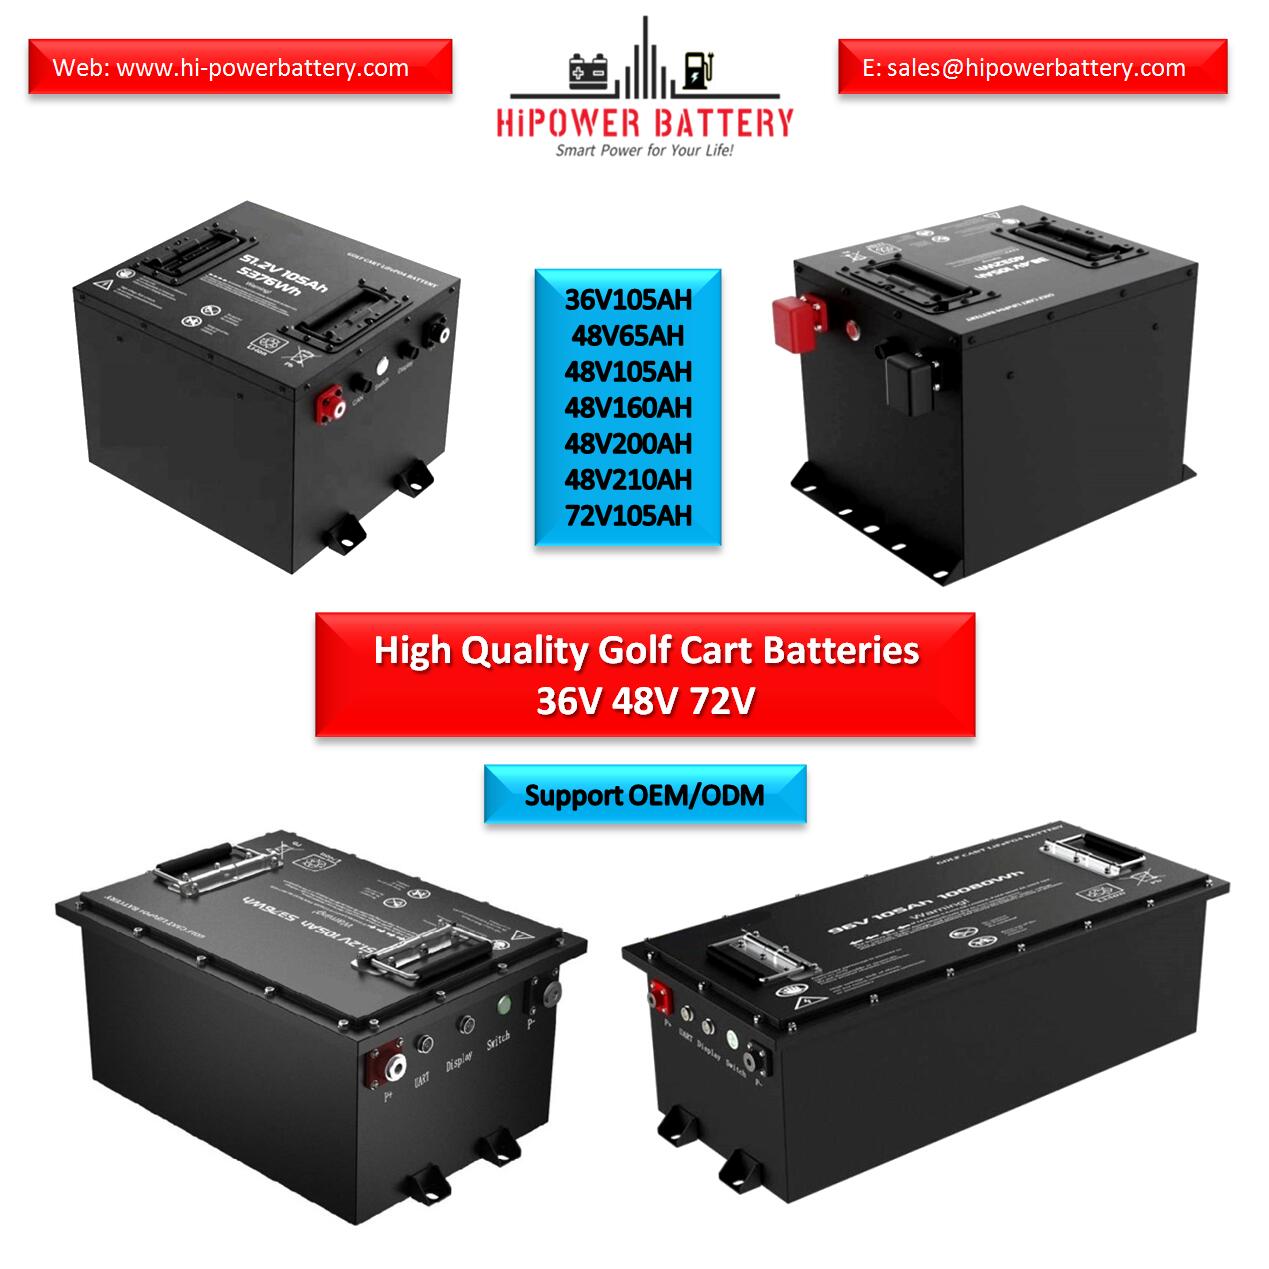 LiFePO4 Battery for Golf Cart and EV